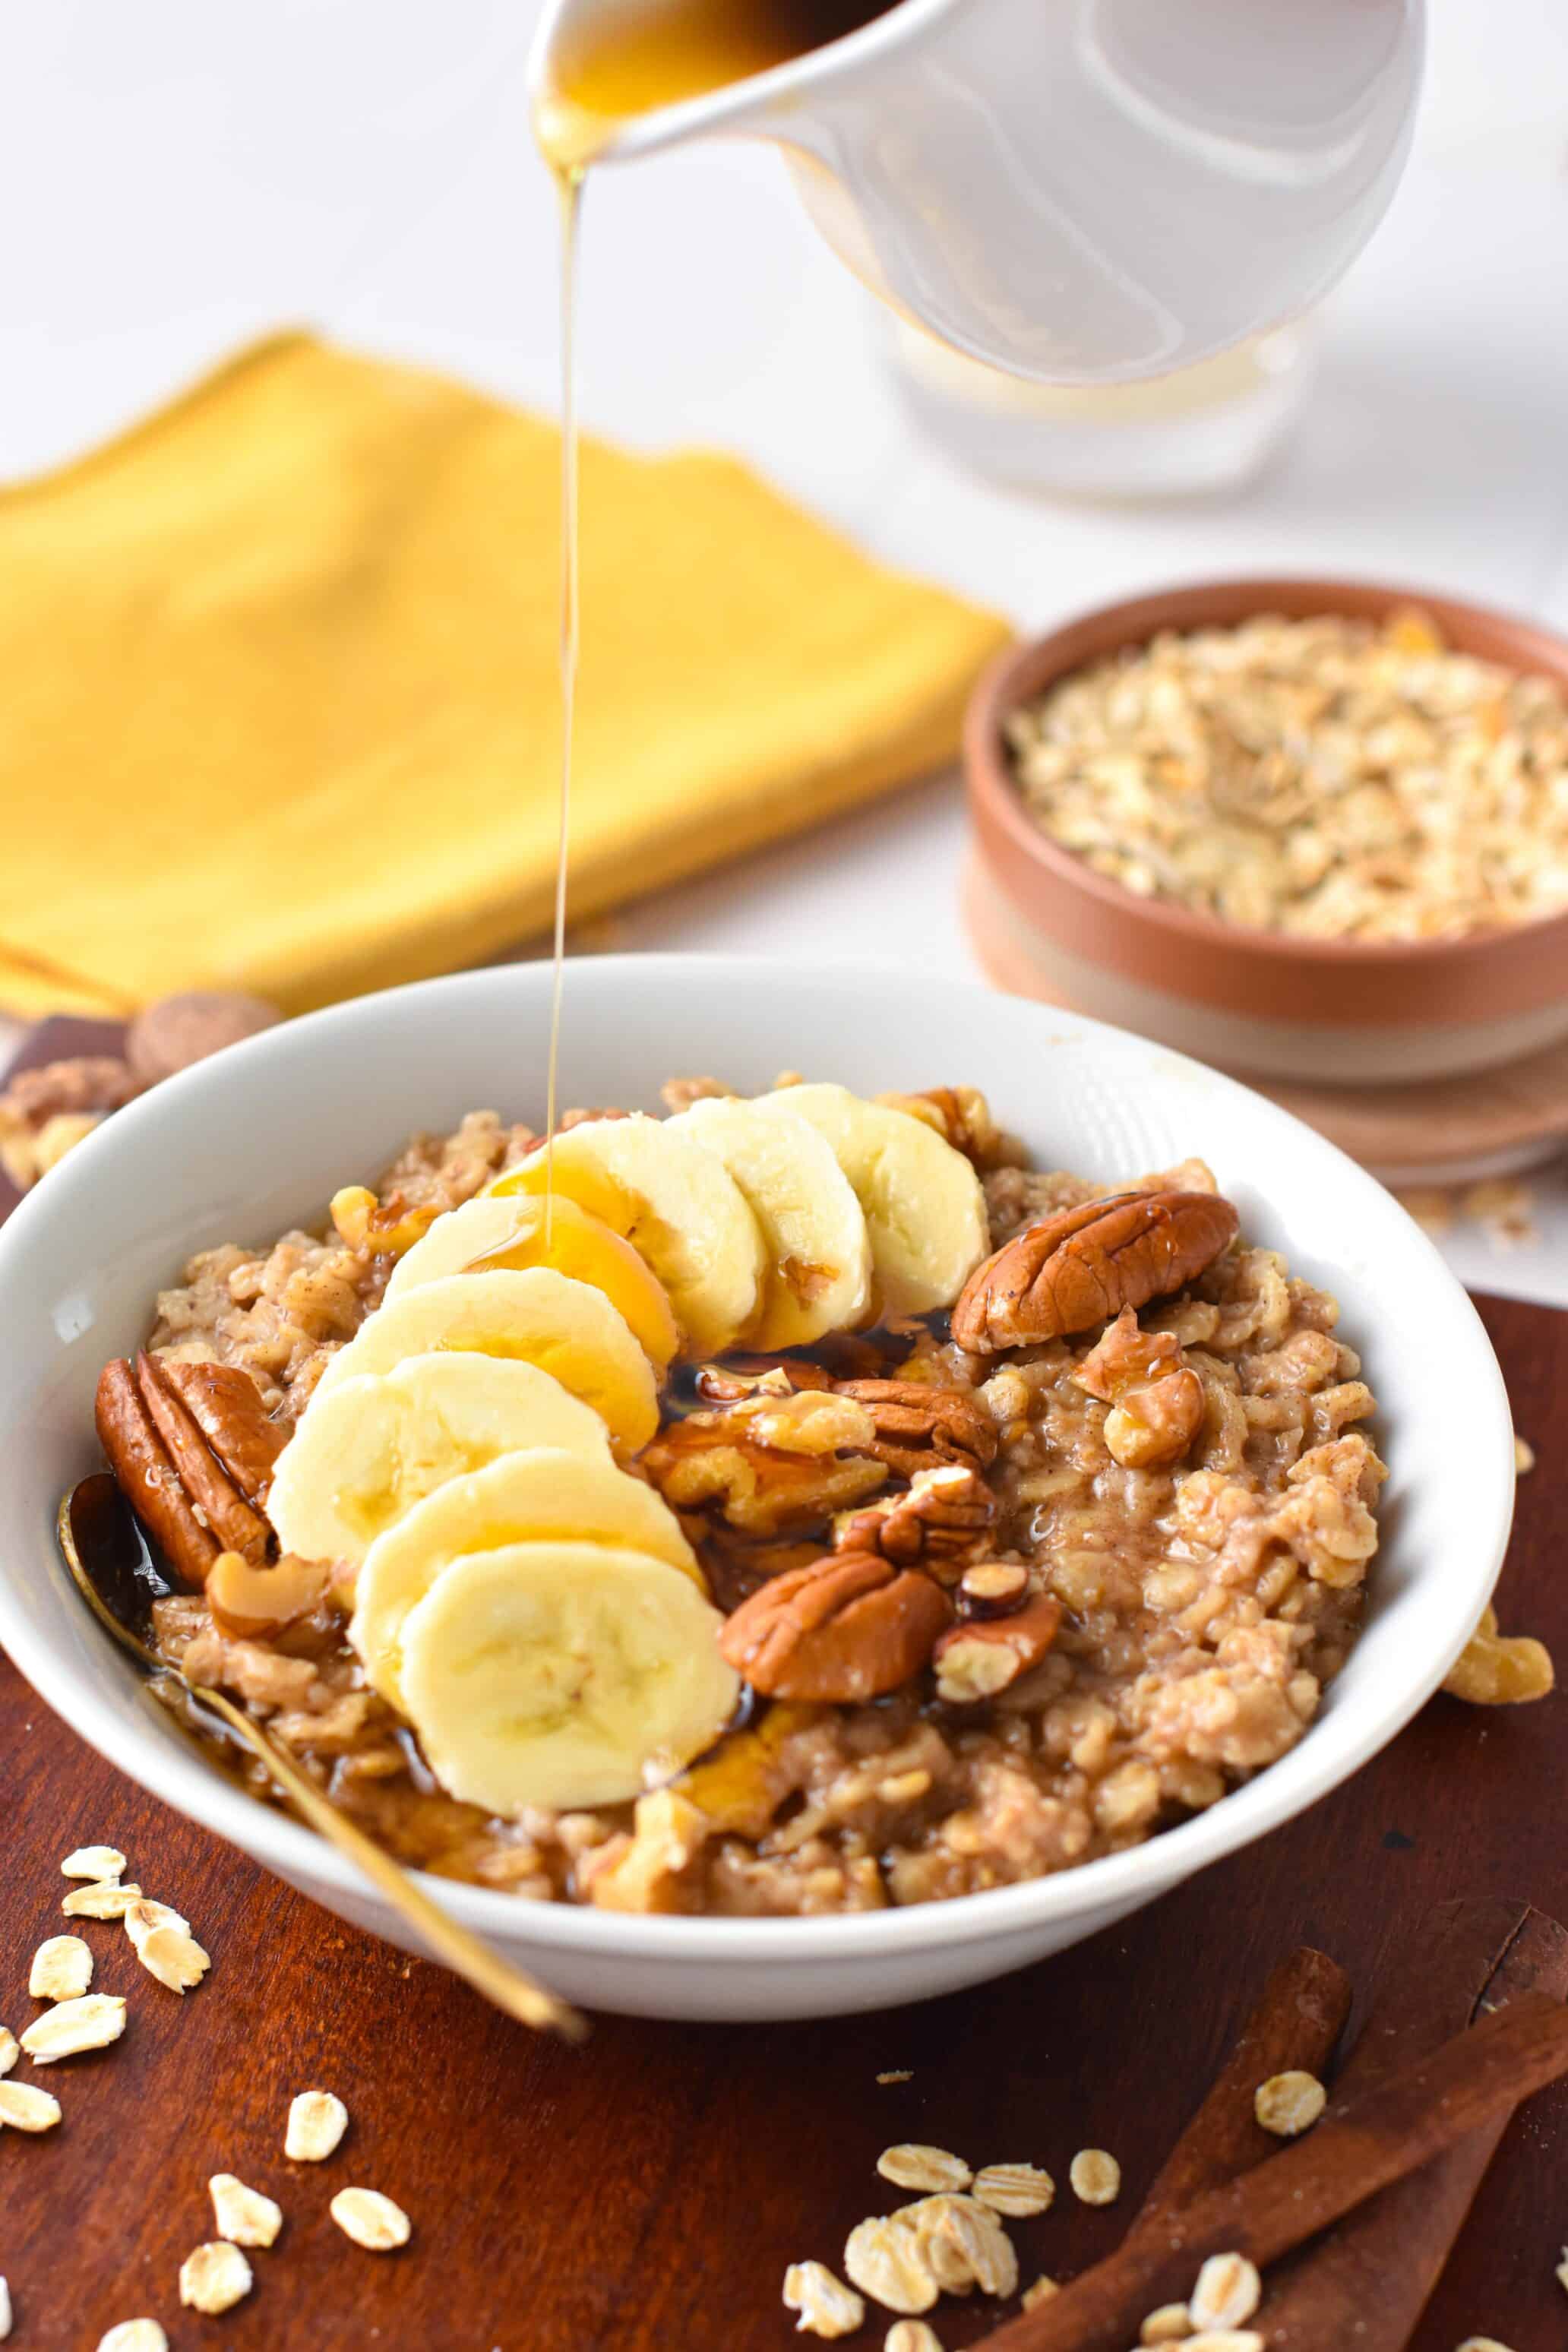 A bowl of vegan oatmeal with banana slices, pecans and walnuts.